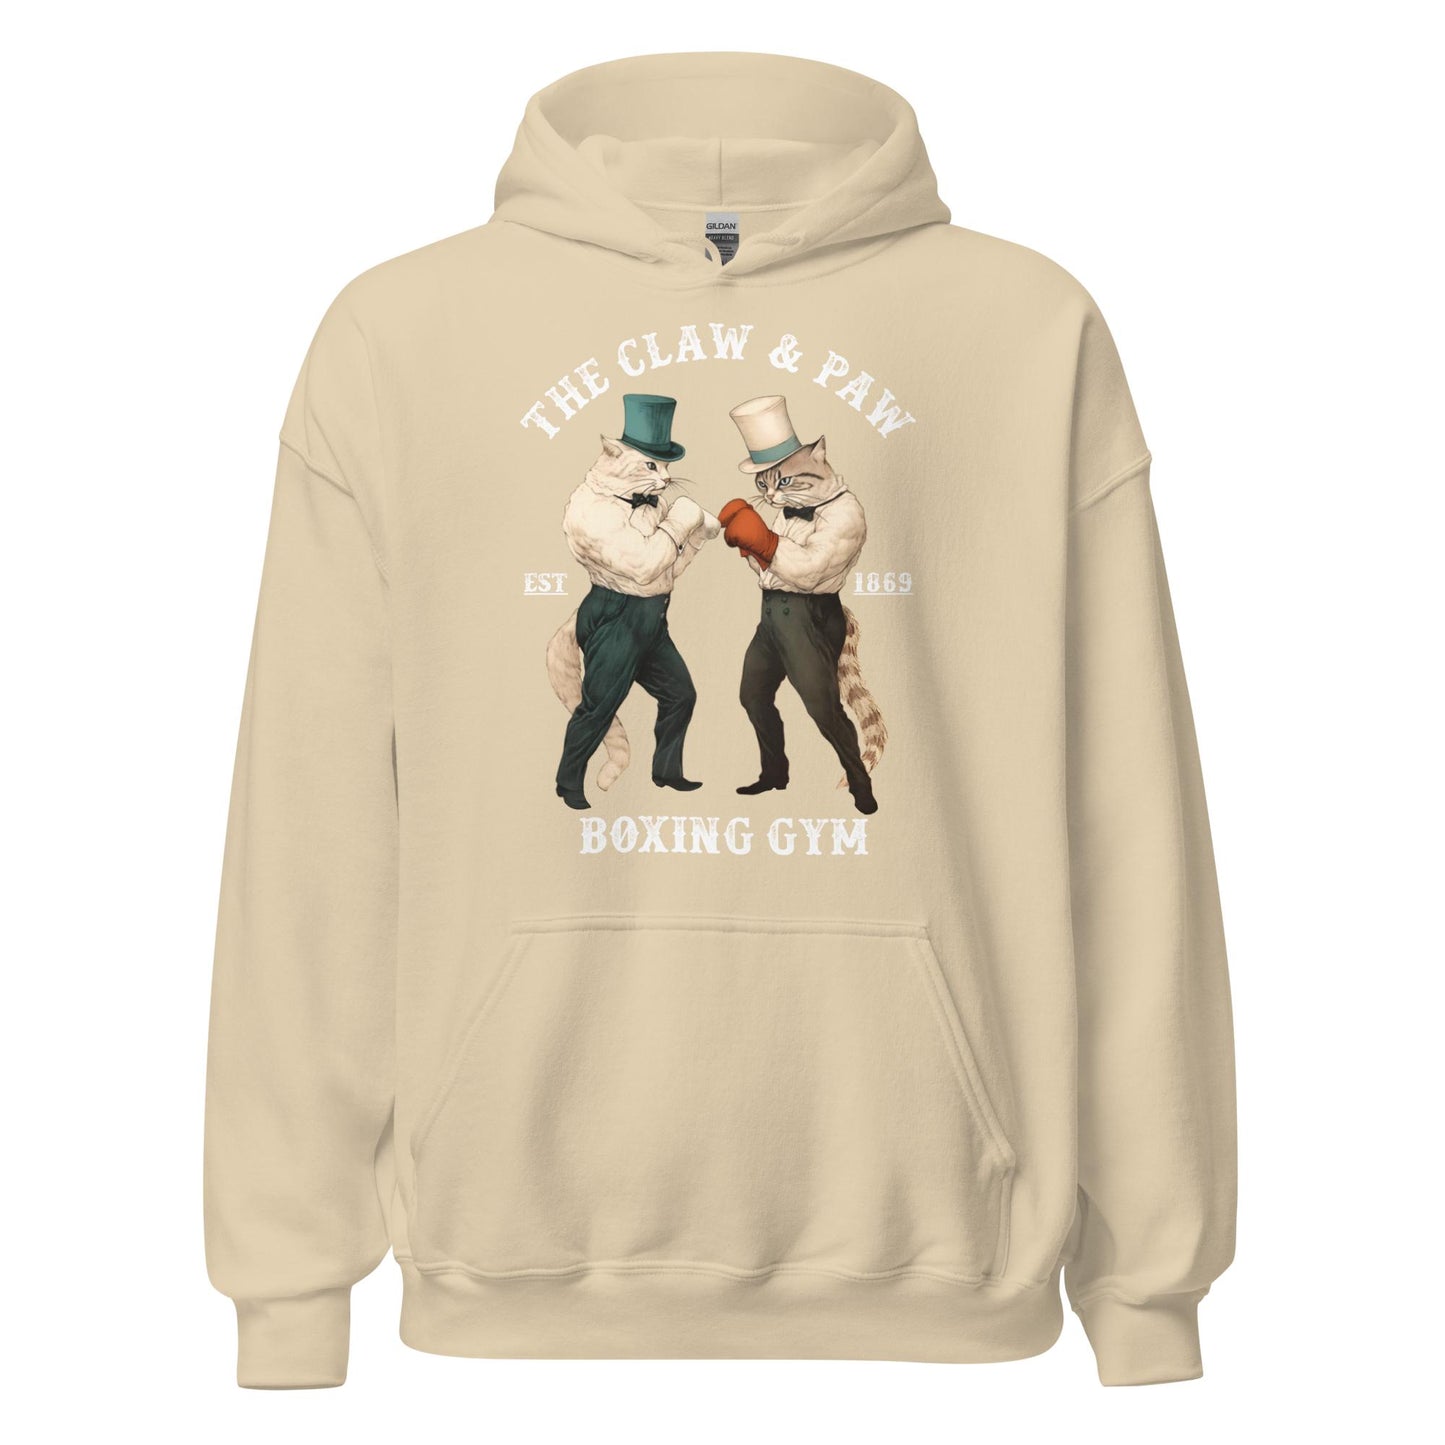 The Claw & Paw Boxing Gym Hoodie